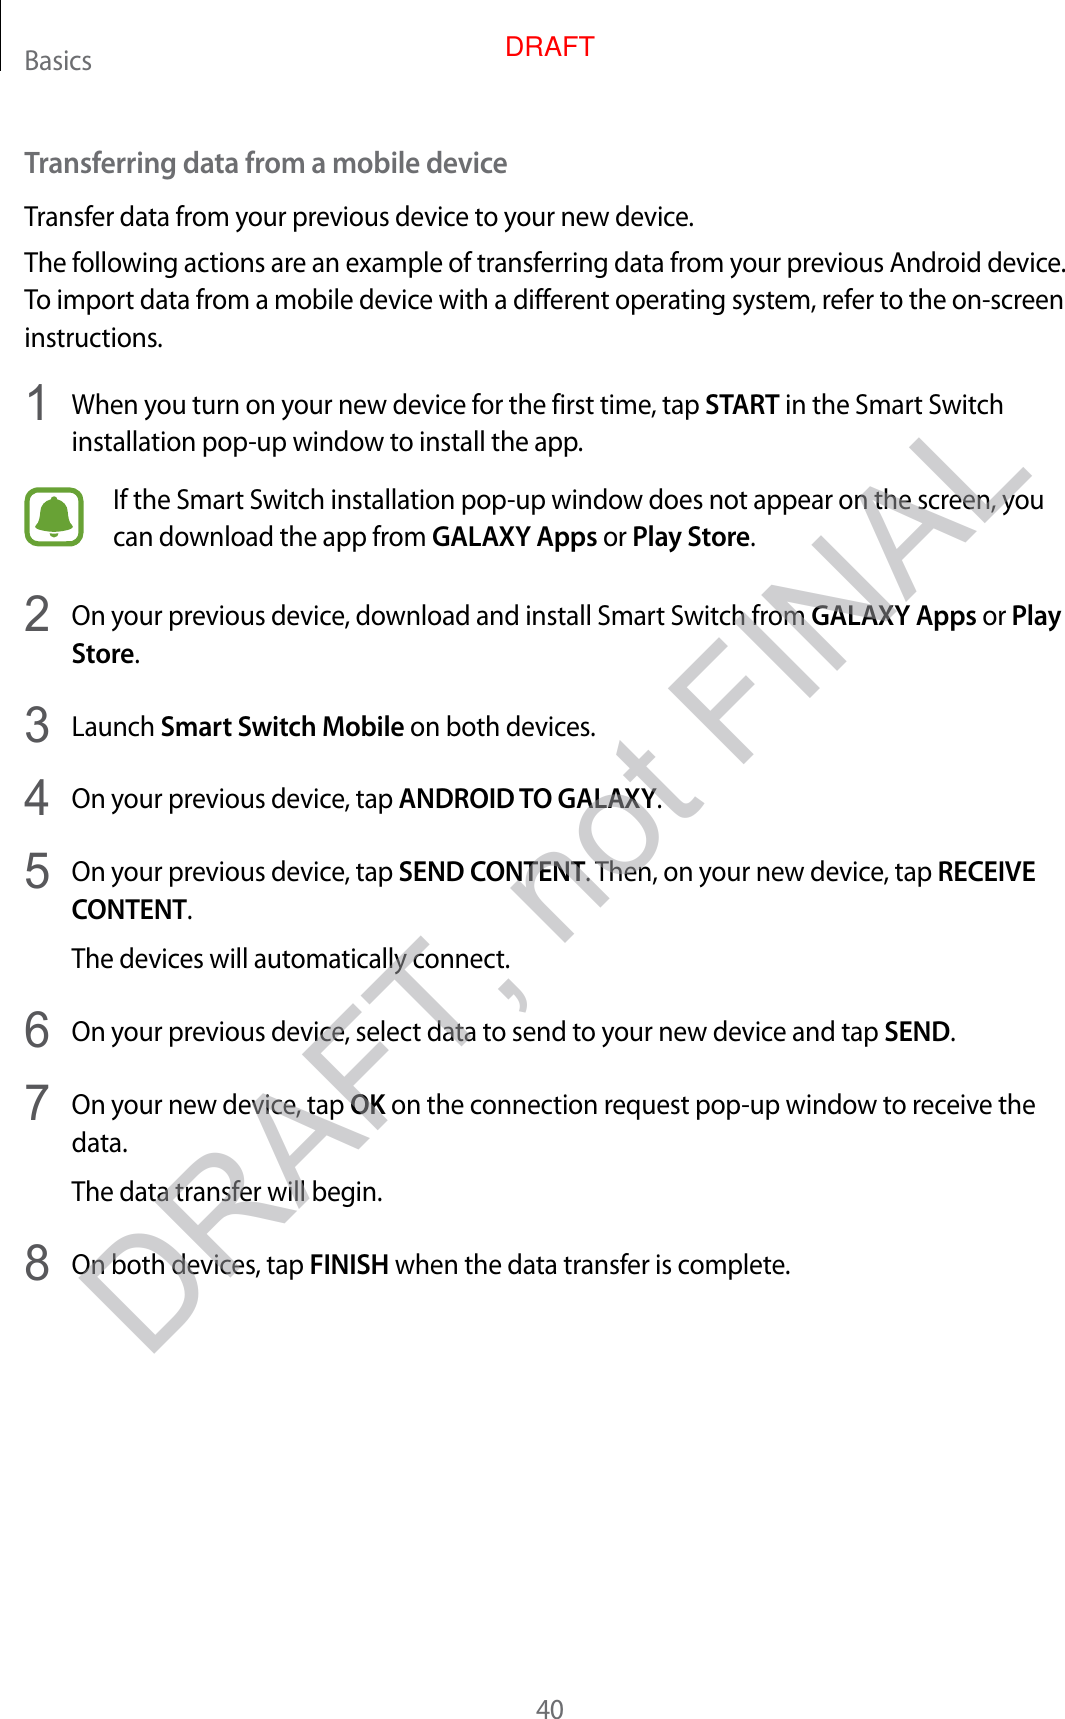 Basics40Transferring data from a mobile deviceTransfer data from your previous device to your new device.The following actions are an example of transferring data from your previous Android device. To import data from a mobile device with a different operating system, refer to the on-screen instructions.1  When you turn on your new device for the first time, tap START in the Smart Switch installation pop-up window to install the app.If the Smart Switch installation pop-up window does not appear on the screen, you can download the app from GALAXY Apps or Play Store.2  On your previous device, download and install Smart Switch from GALAXY Apps or Play Store.3  Launch Smart Switch Mobile on both devices.4  On your previous device, tap ANDROID TO GALAXY.5  On your previous device, tap SEND CONTENT. Then, on your new device, tap RECEIVE CONTENT.The devices will automatically connect.6  On your previous device, select data to send to your new device and tap SEND.7  On your new device, tap OK on the connection request pop-up window to receive the data.The data transfer will begin.8  On both devices, tap FINISH when the data transfer is complete.DRAFT, not FINALDRAFT